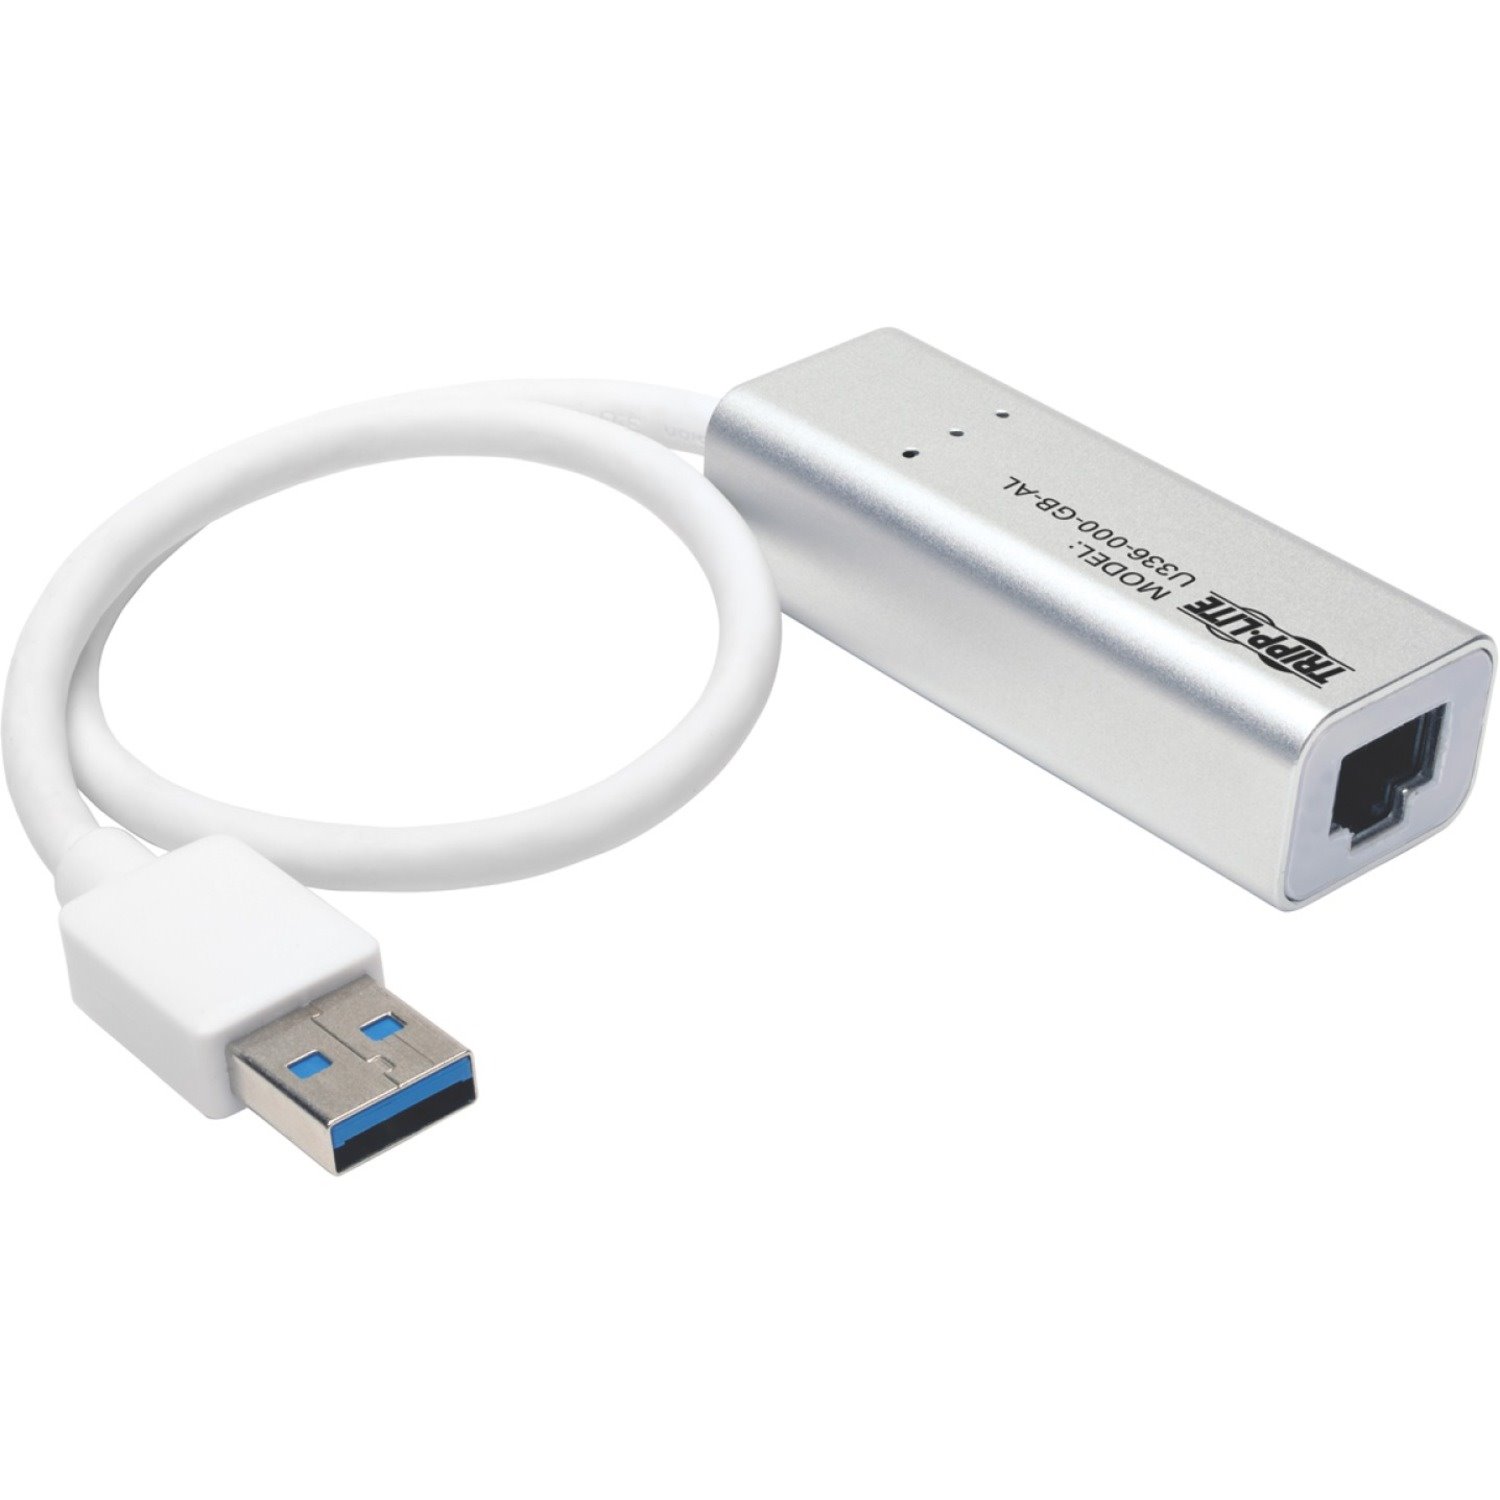 Eaton Tripp Lite Series USB 3.0 SuperSpeed to Gigabit Ethernet NIC Network Adapter, 10/100/1000, Plug and Play, Aluminum